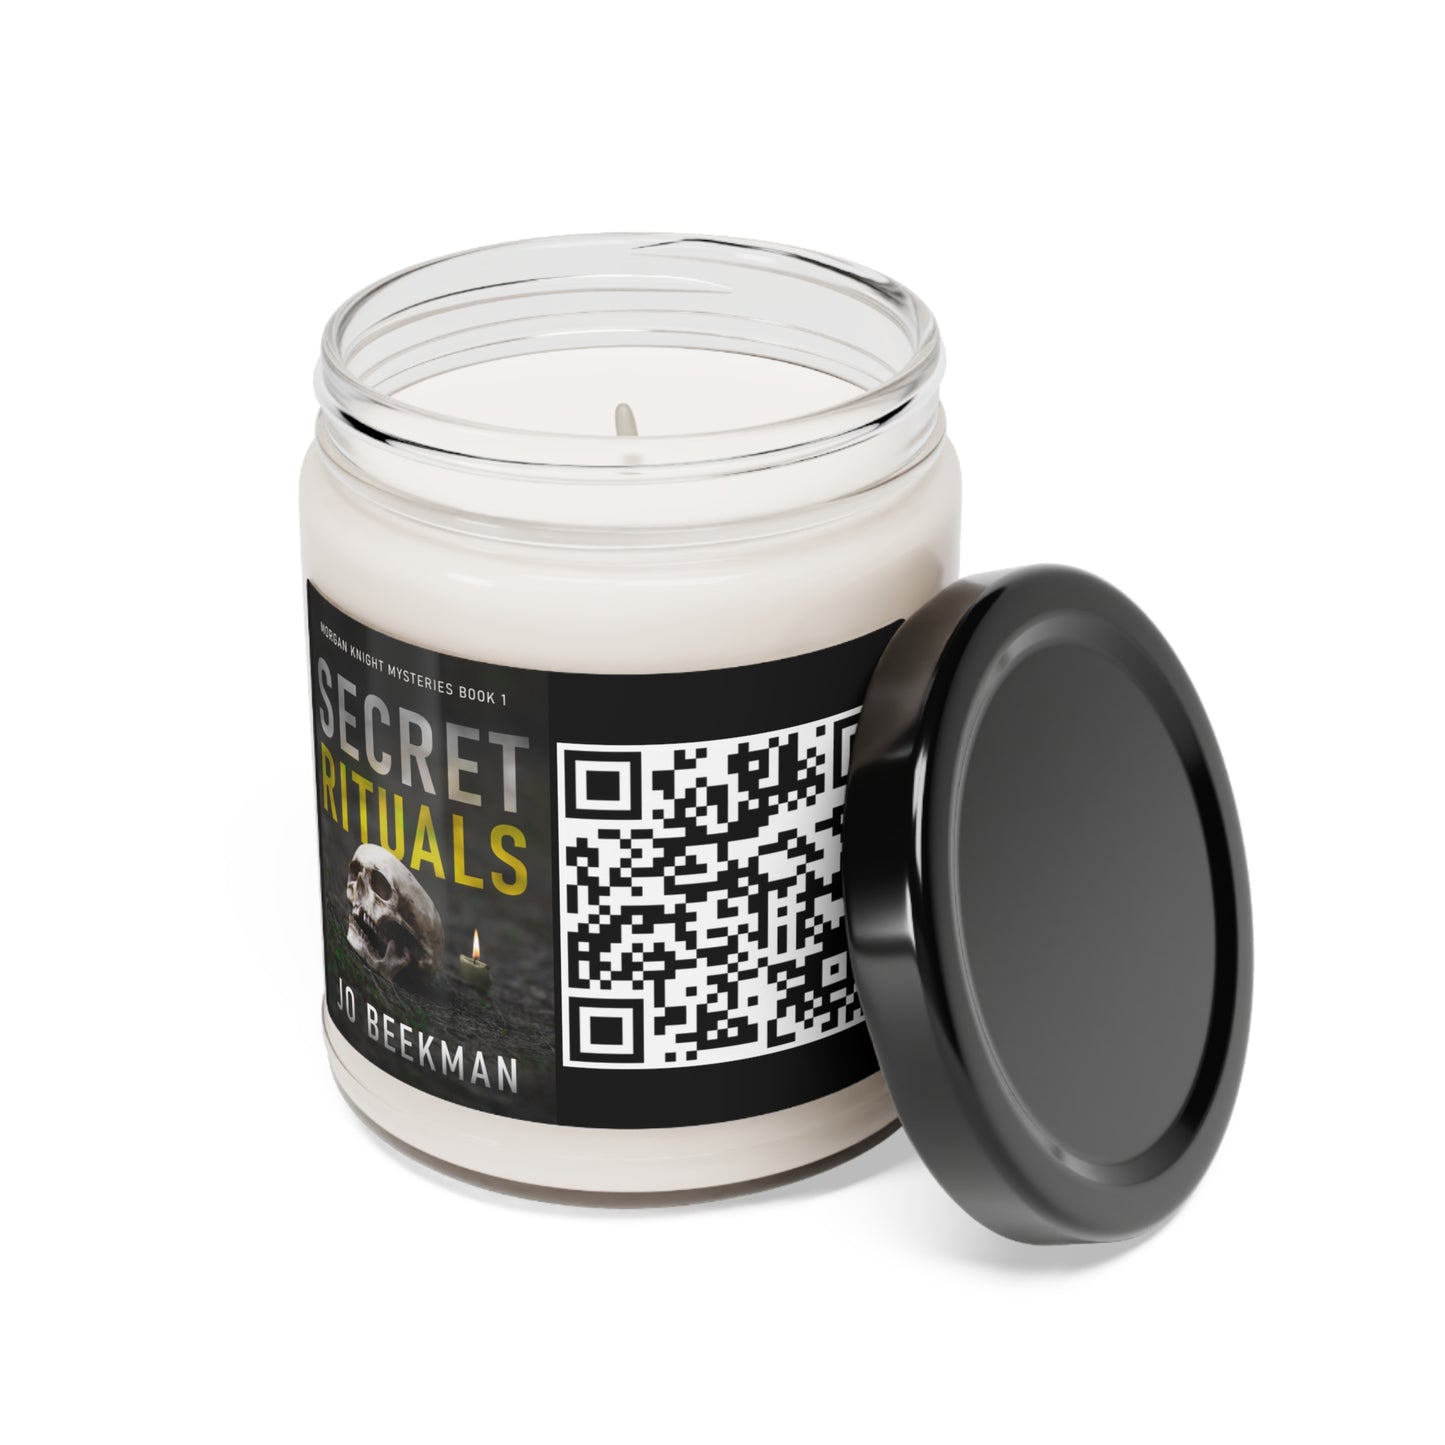 Secret Rituals - Scented Soy Candle